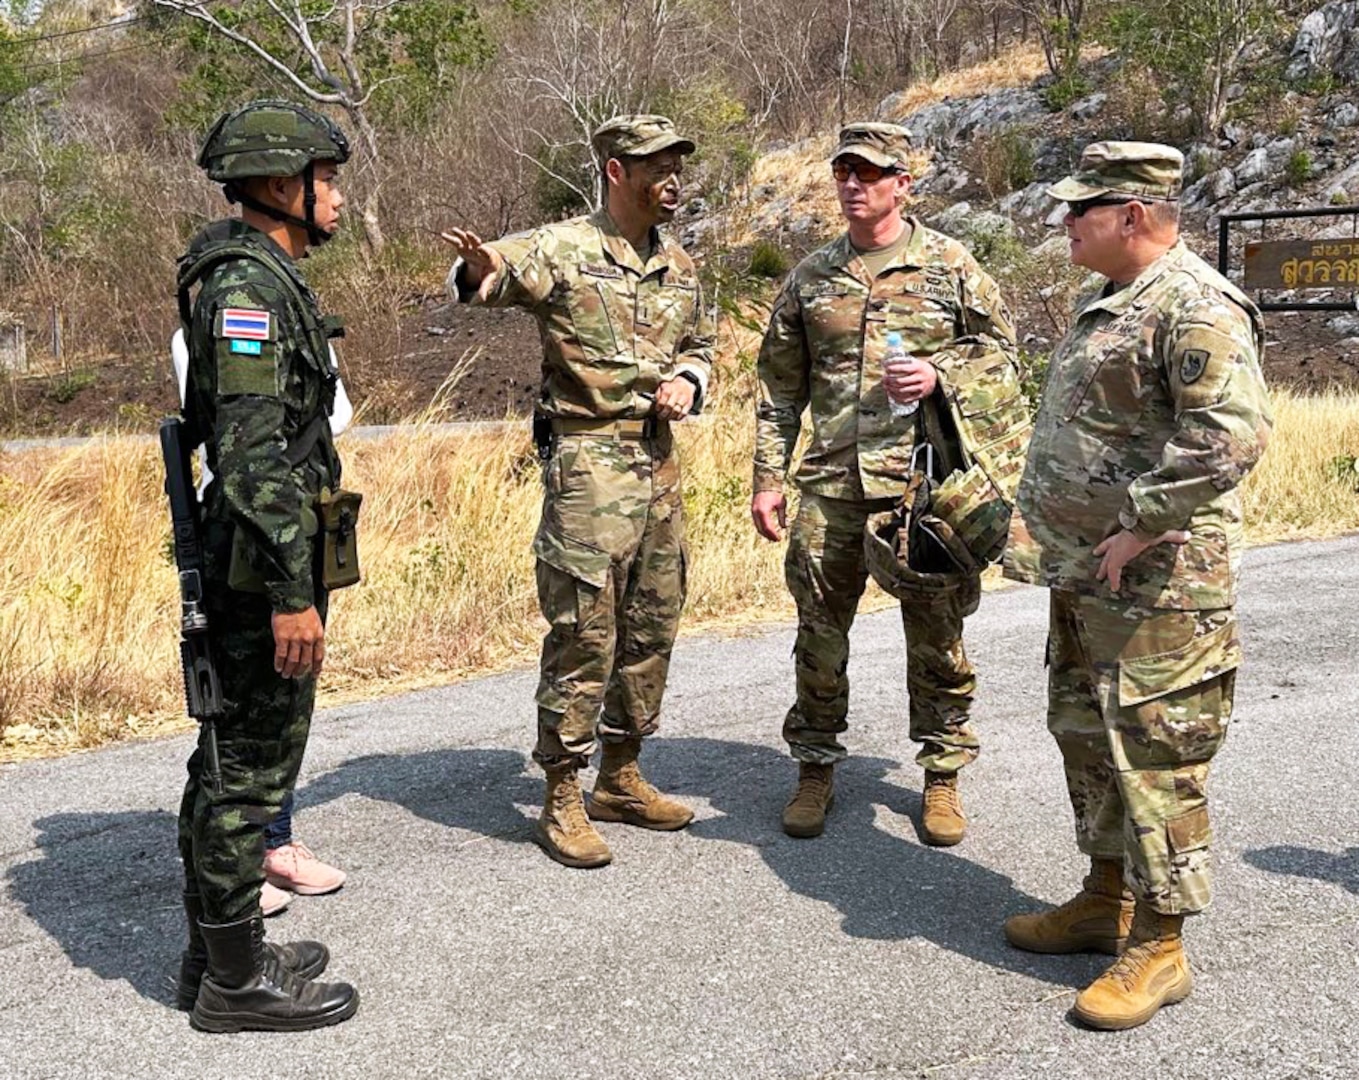 Maj. Gen. Bret Daugherty, the adjutant general, Washington National Guard, and Col. Matthew James, commander, 81st Stryker Brigade Combat Team, receive a briefing while visiting Washington National Guard members working with the Royal Thai Army, March 7, 2023.